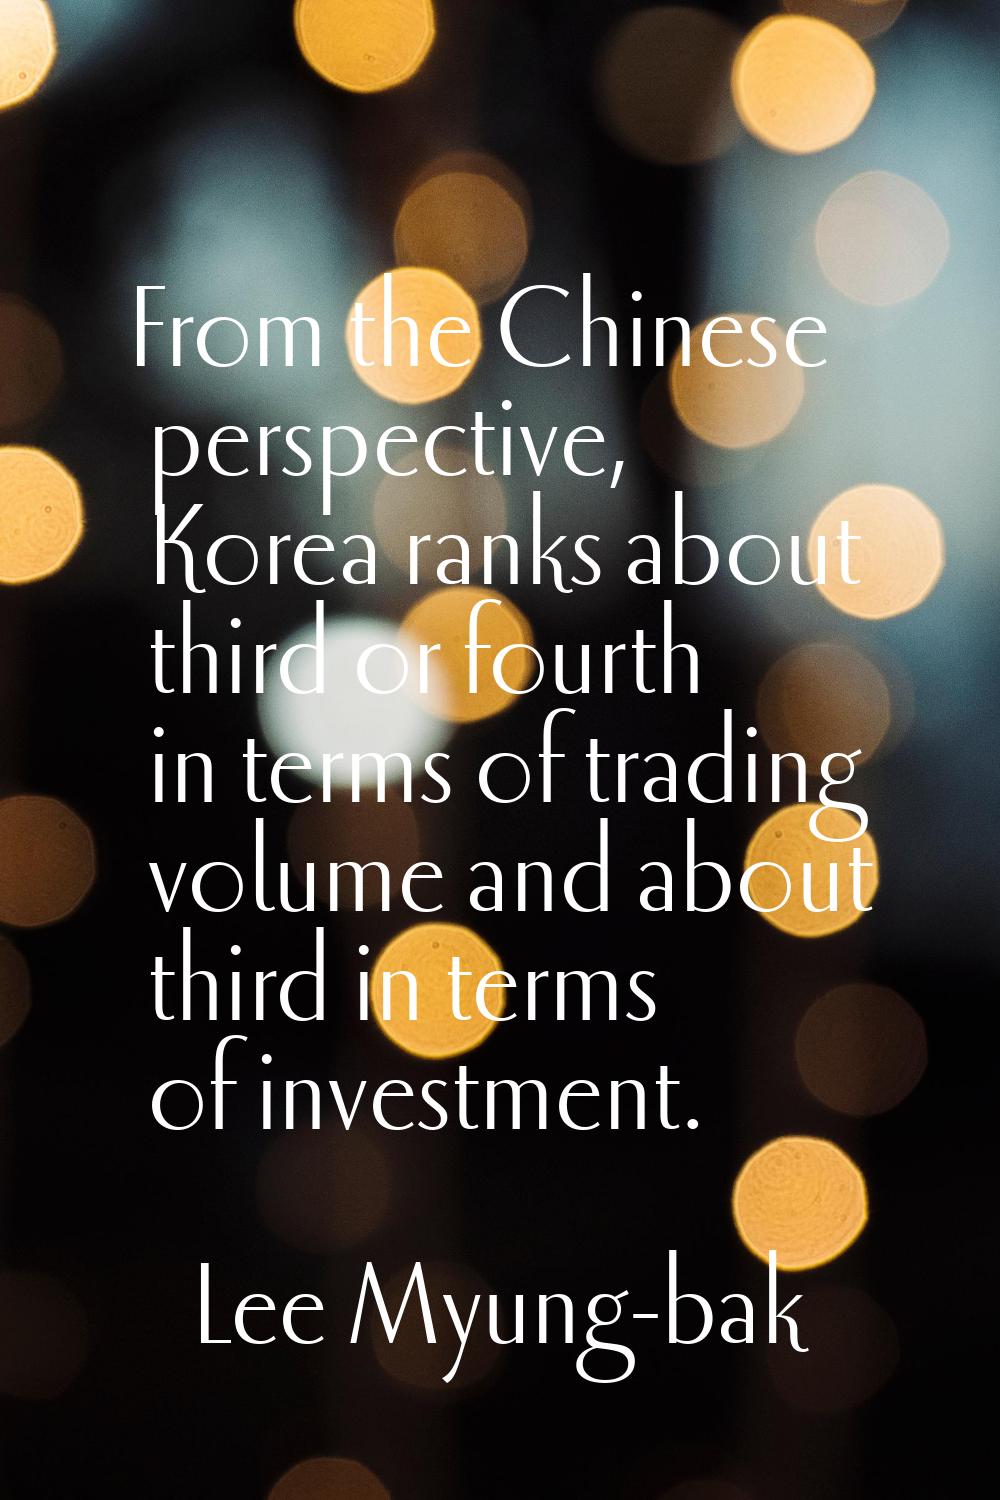 From the Chinese perspective, Korea ranks about third or fourth in terms of trading volume and abou